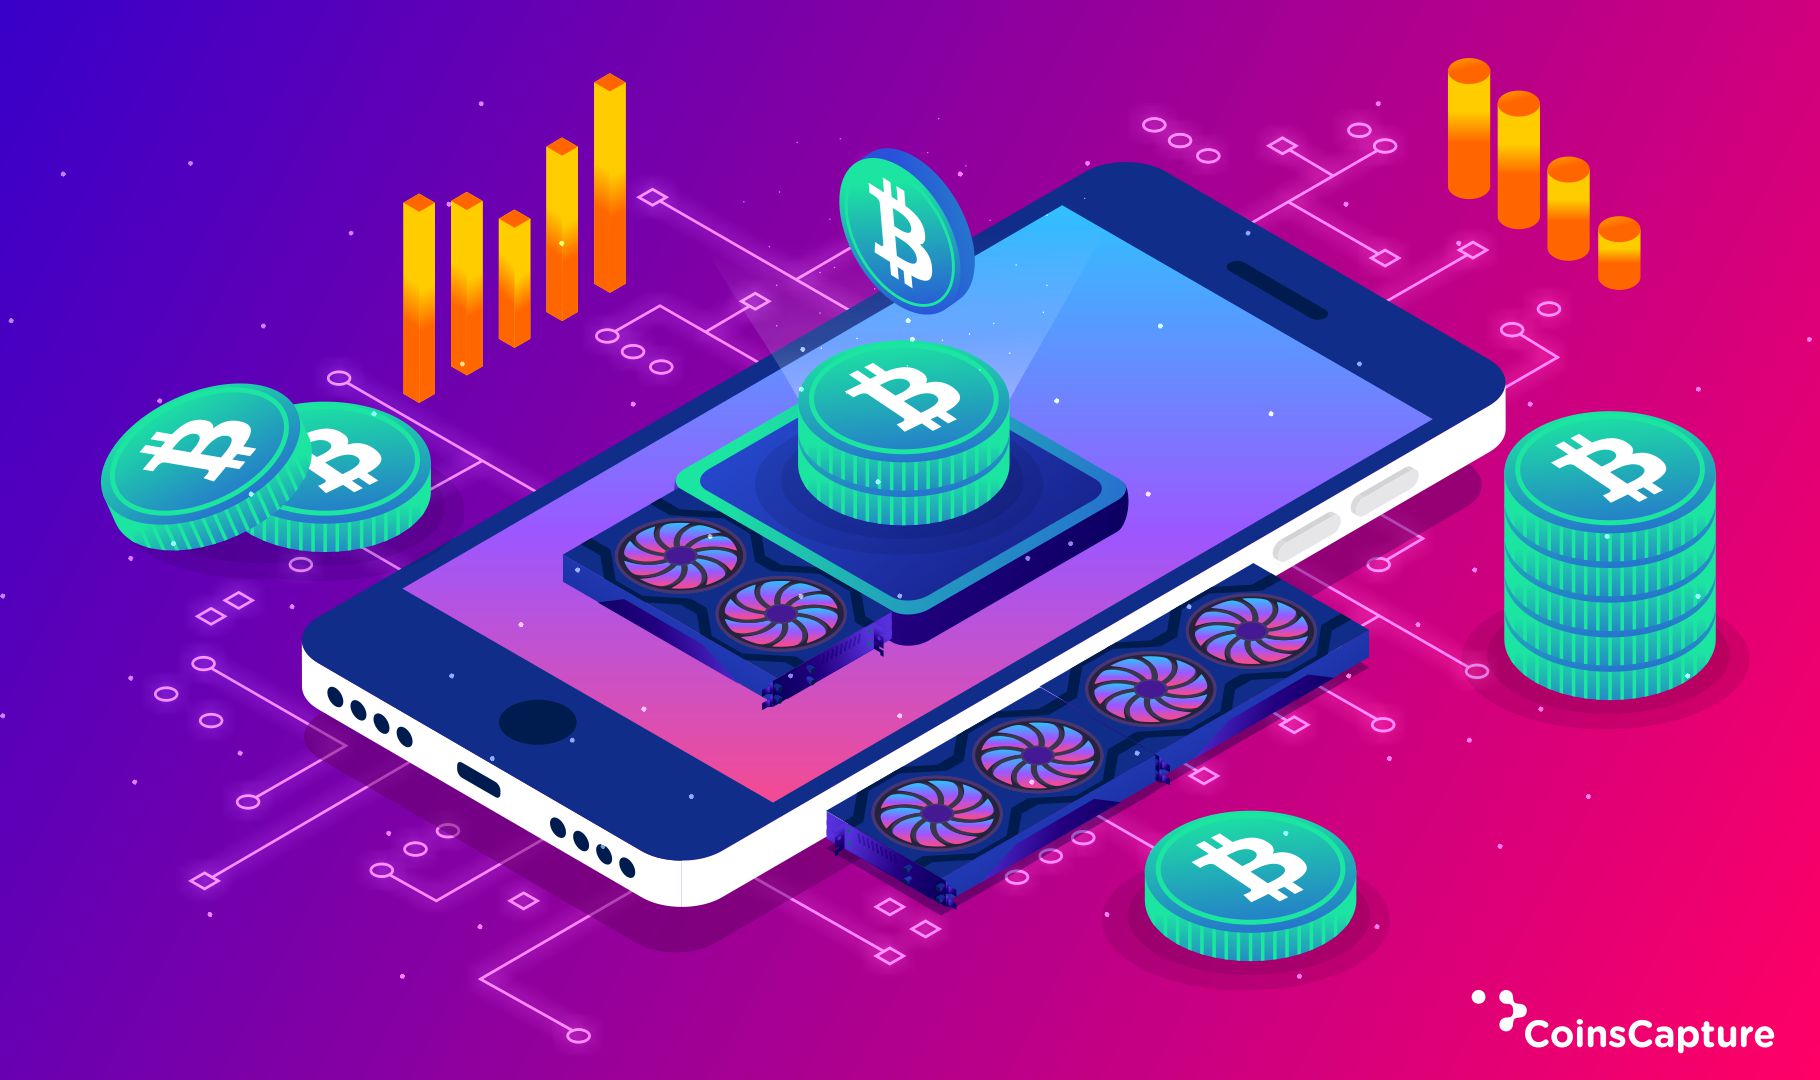 mining crypto on your phone